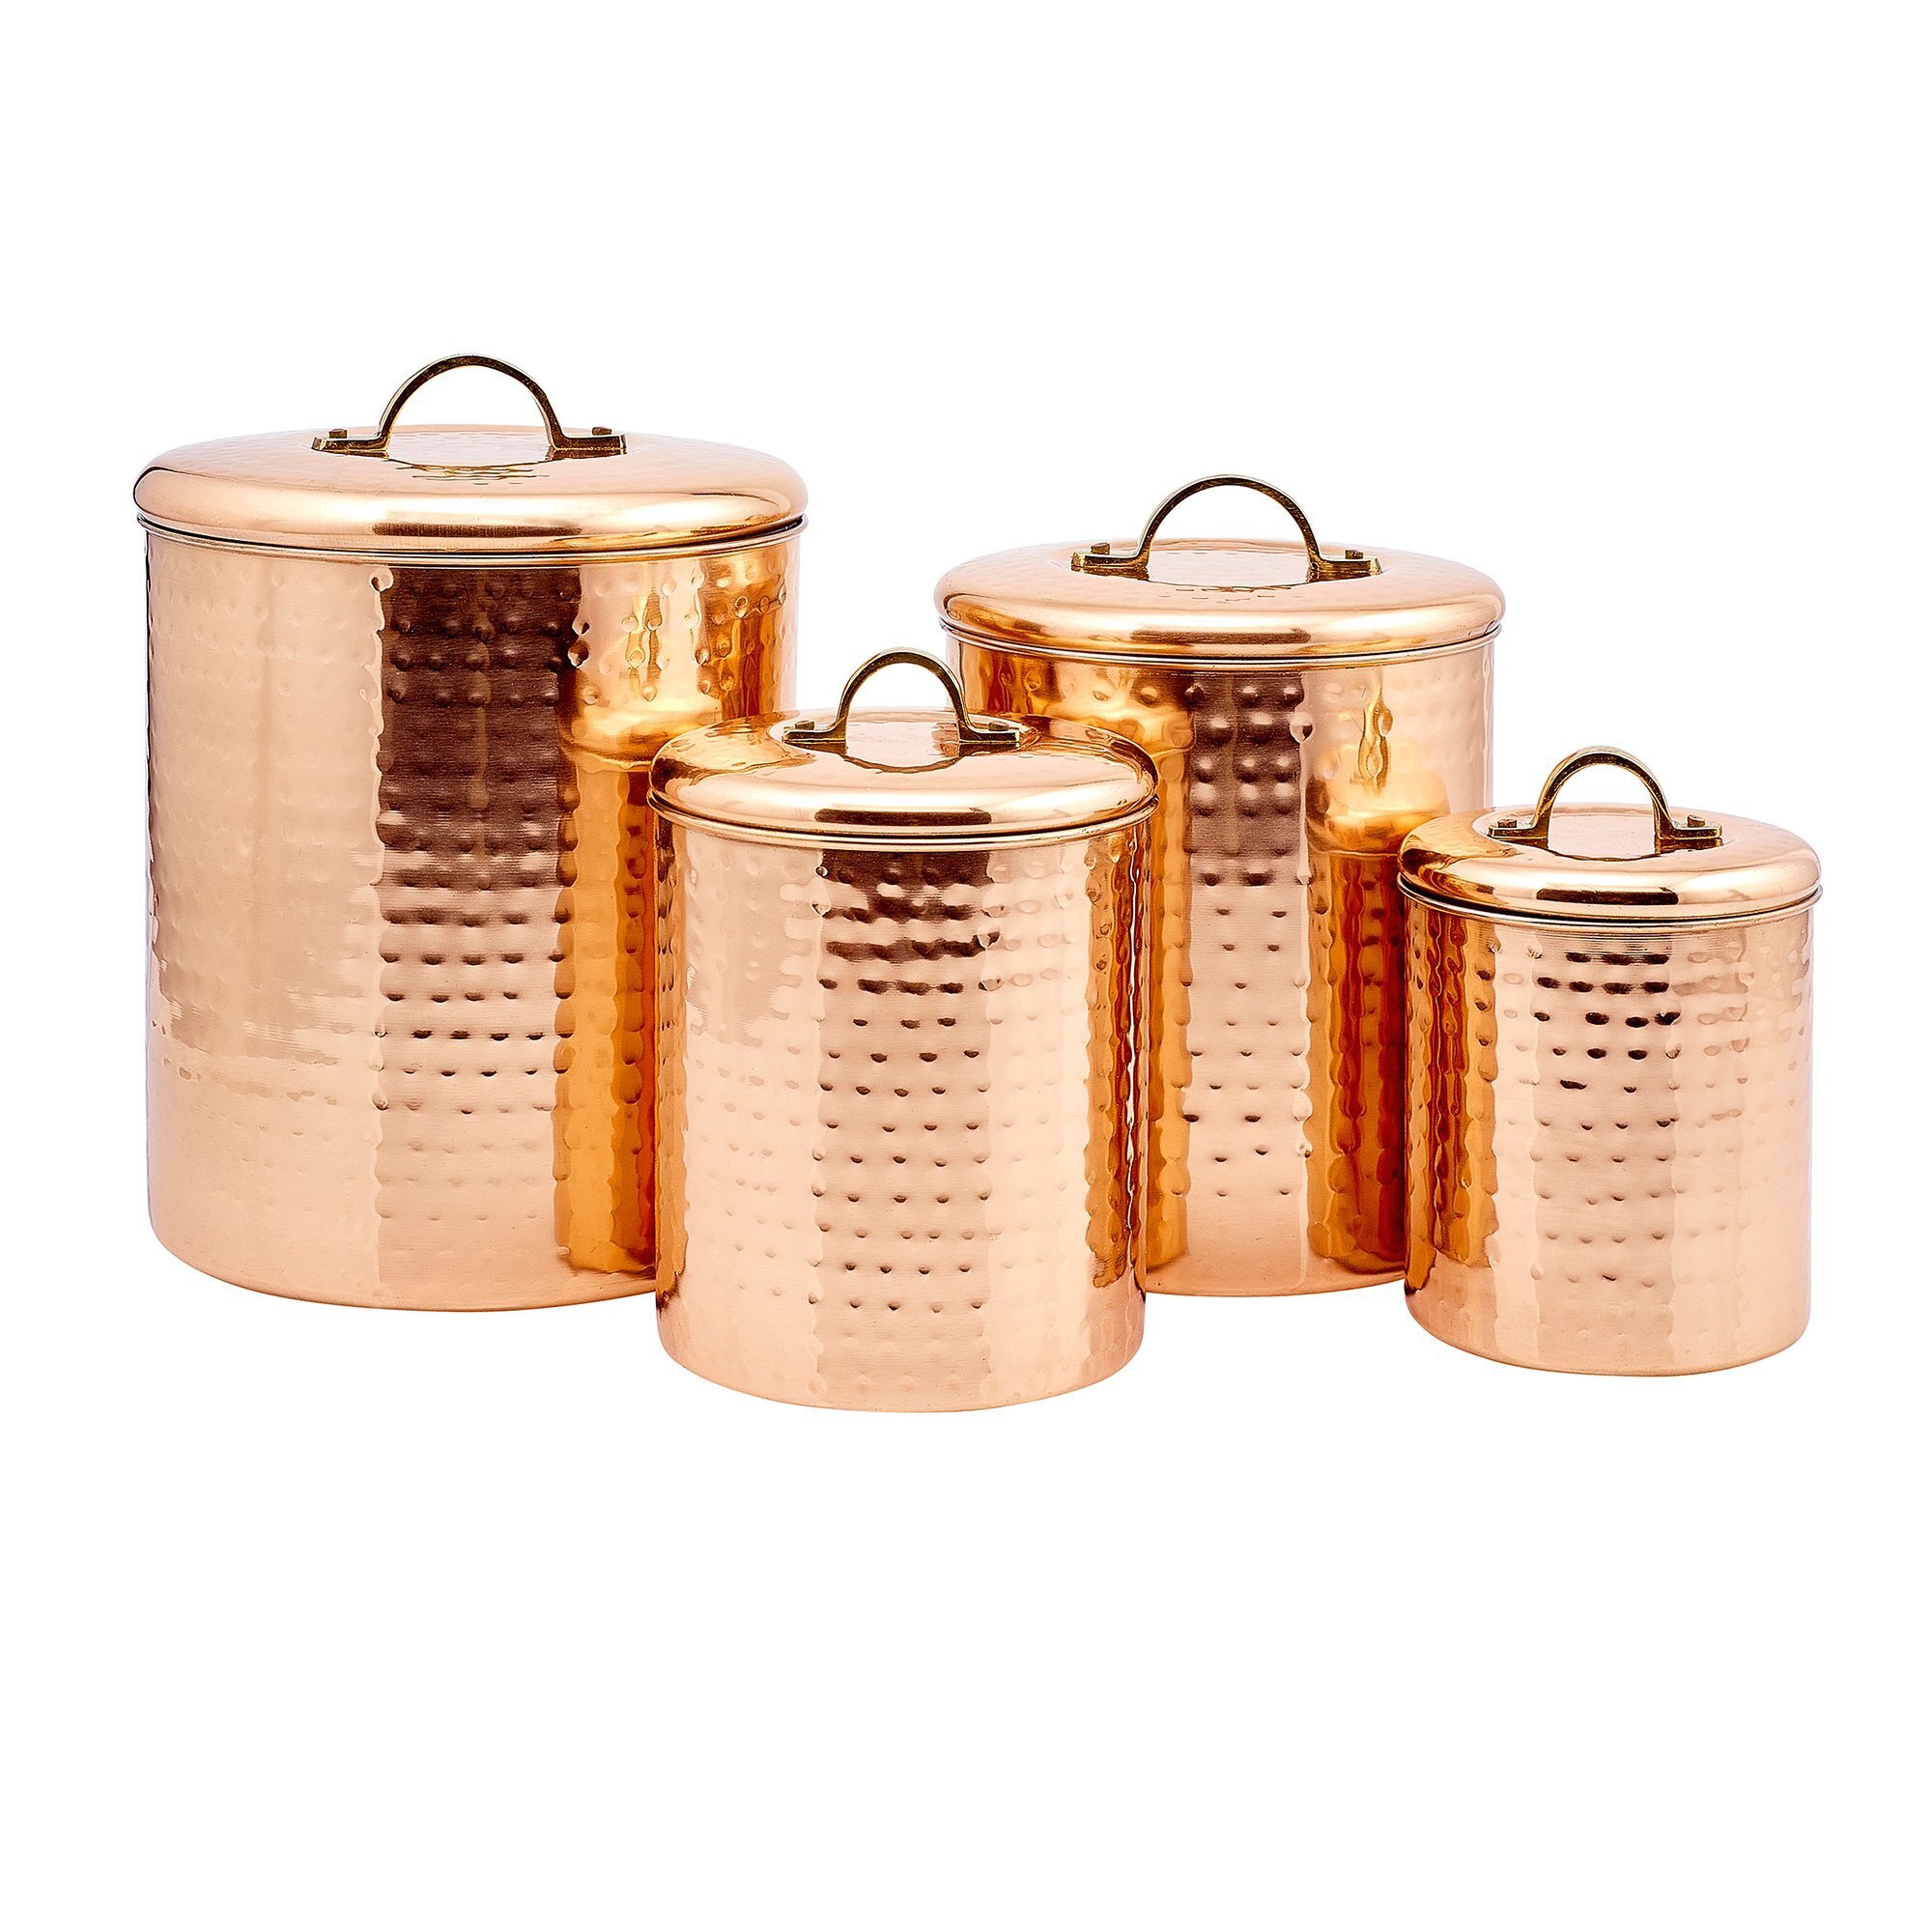 Textured Copper Canister Set x4 Piece 